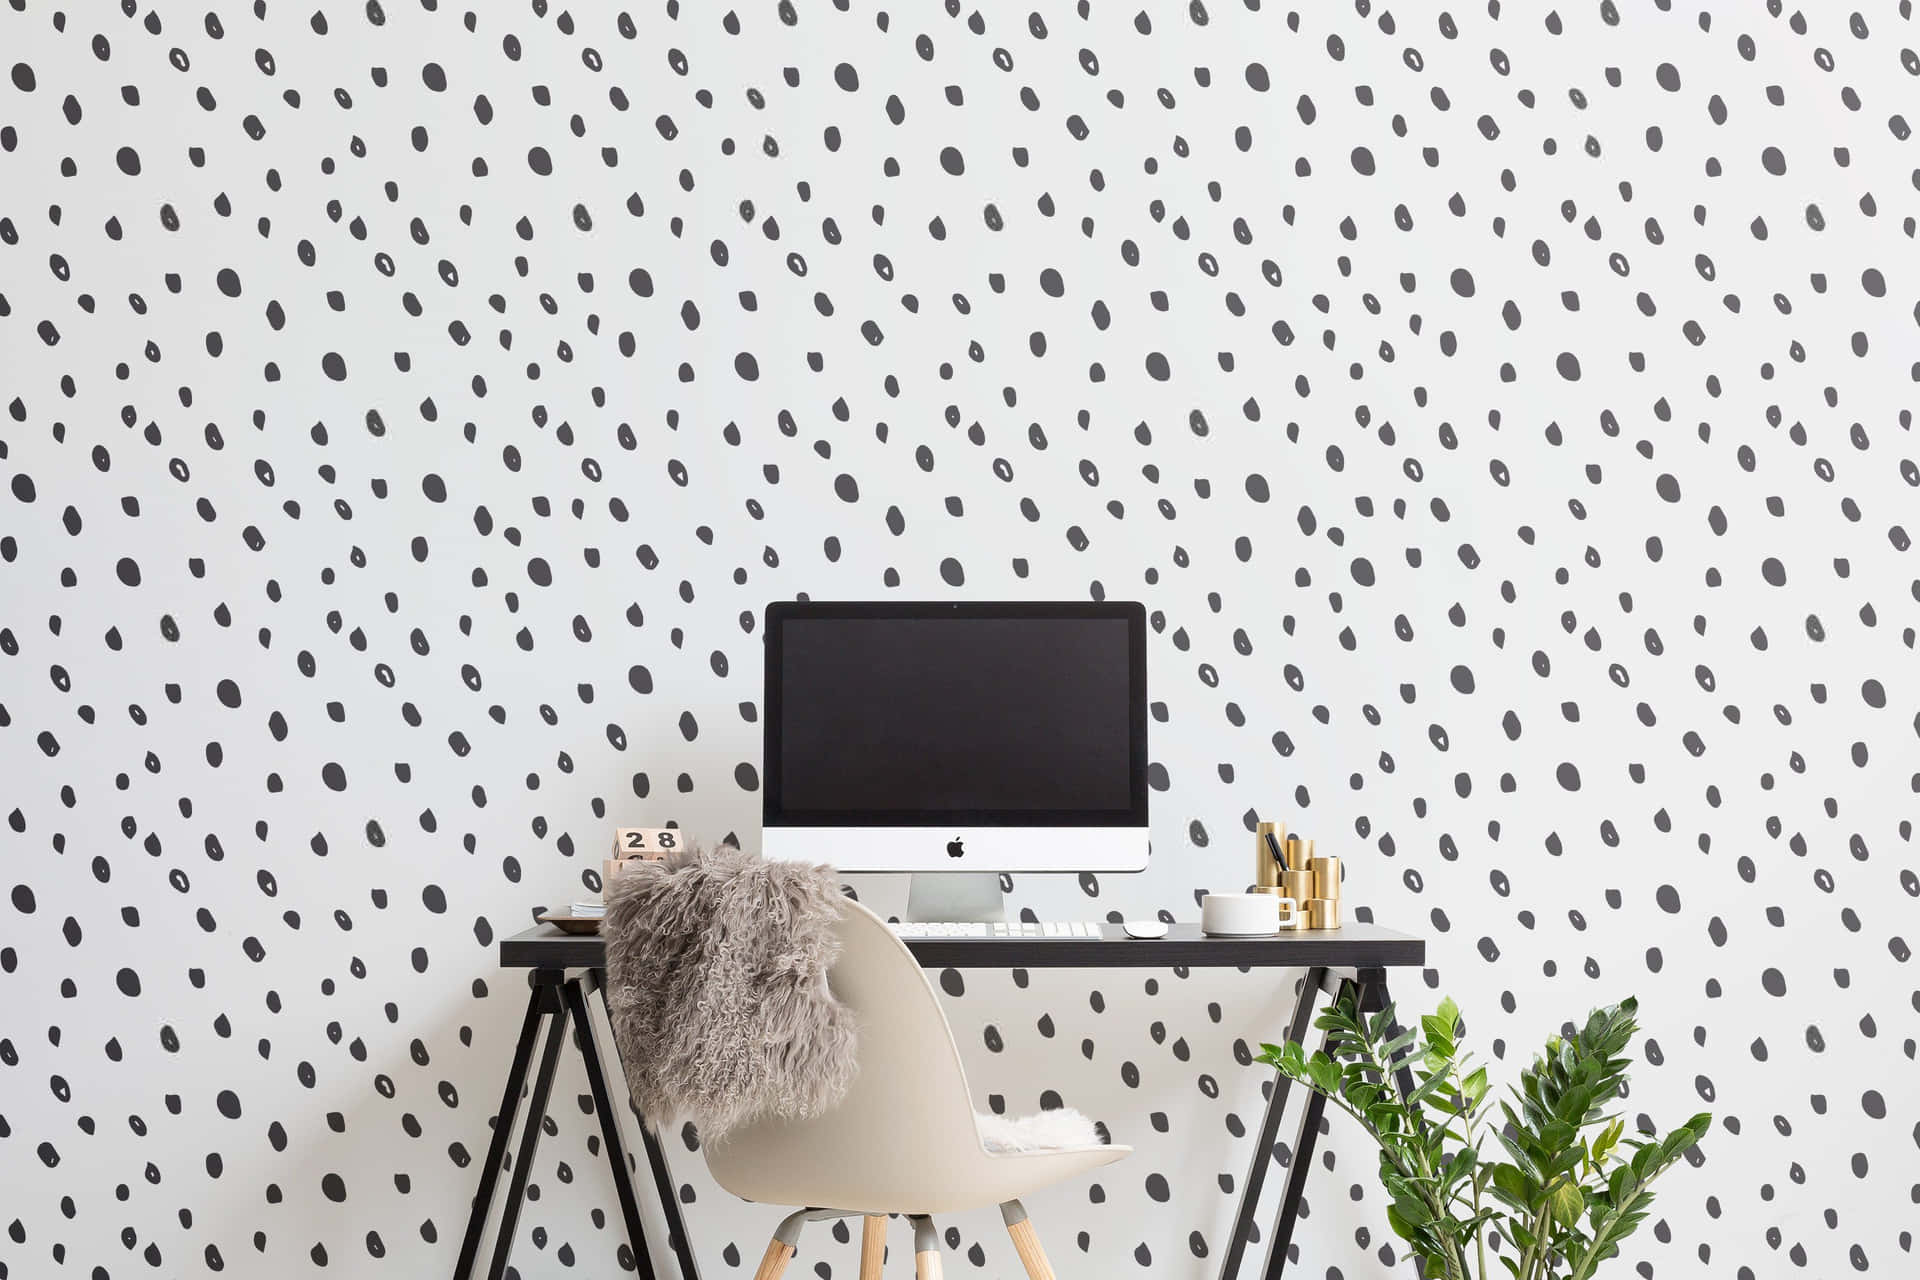 A Desk With A Black And White Polka Dot Wallpaper